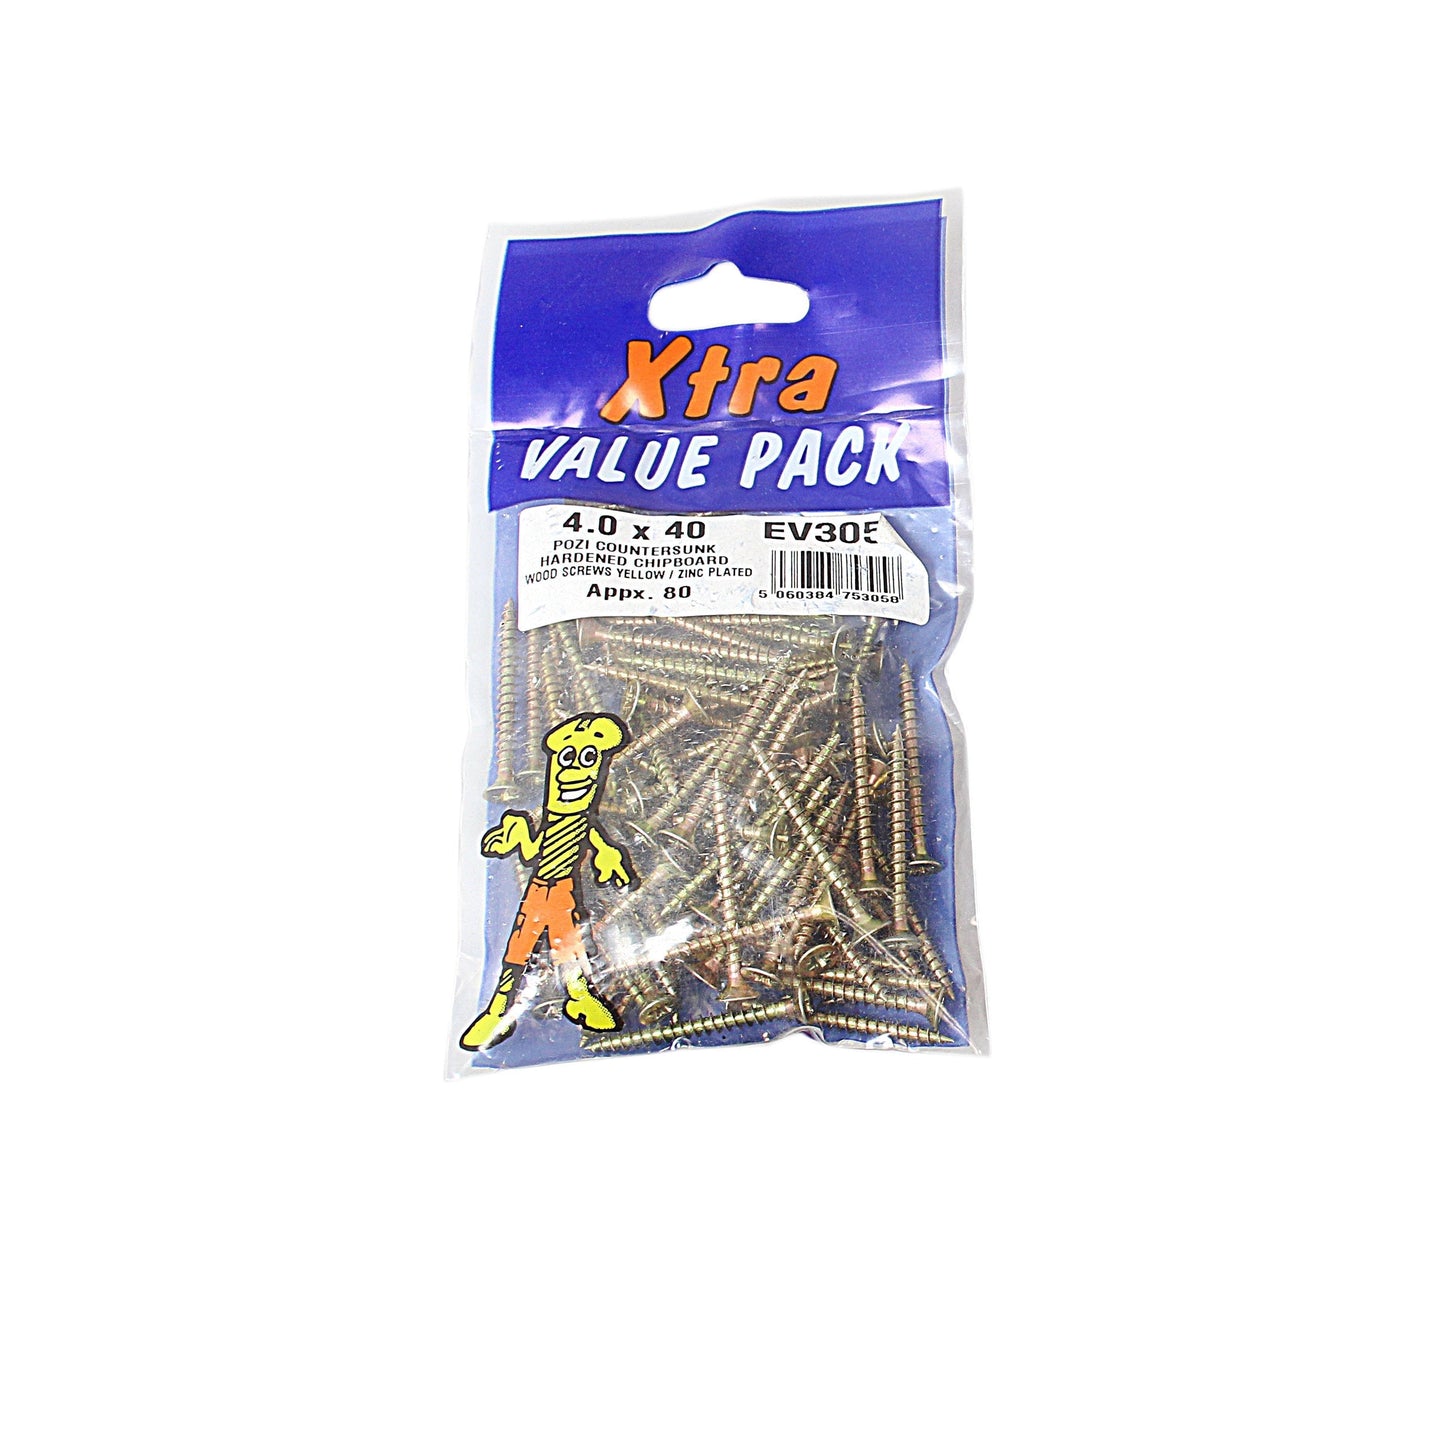 4.0 x 40 Pozi c/sk Chipboard Screws Yellow Diy Xtra Value 5305 (Large Letter Rate)